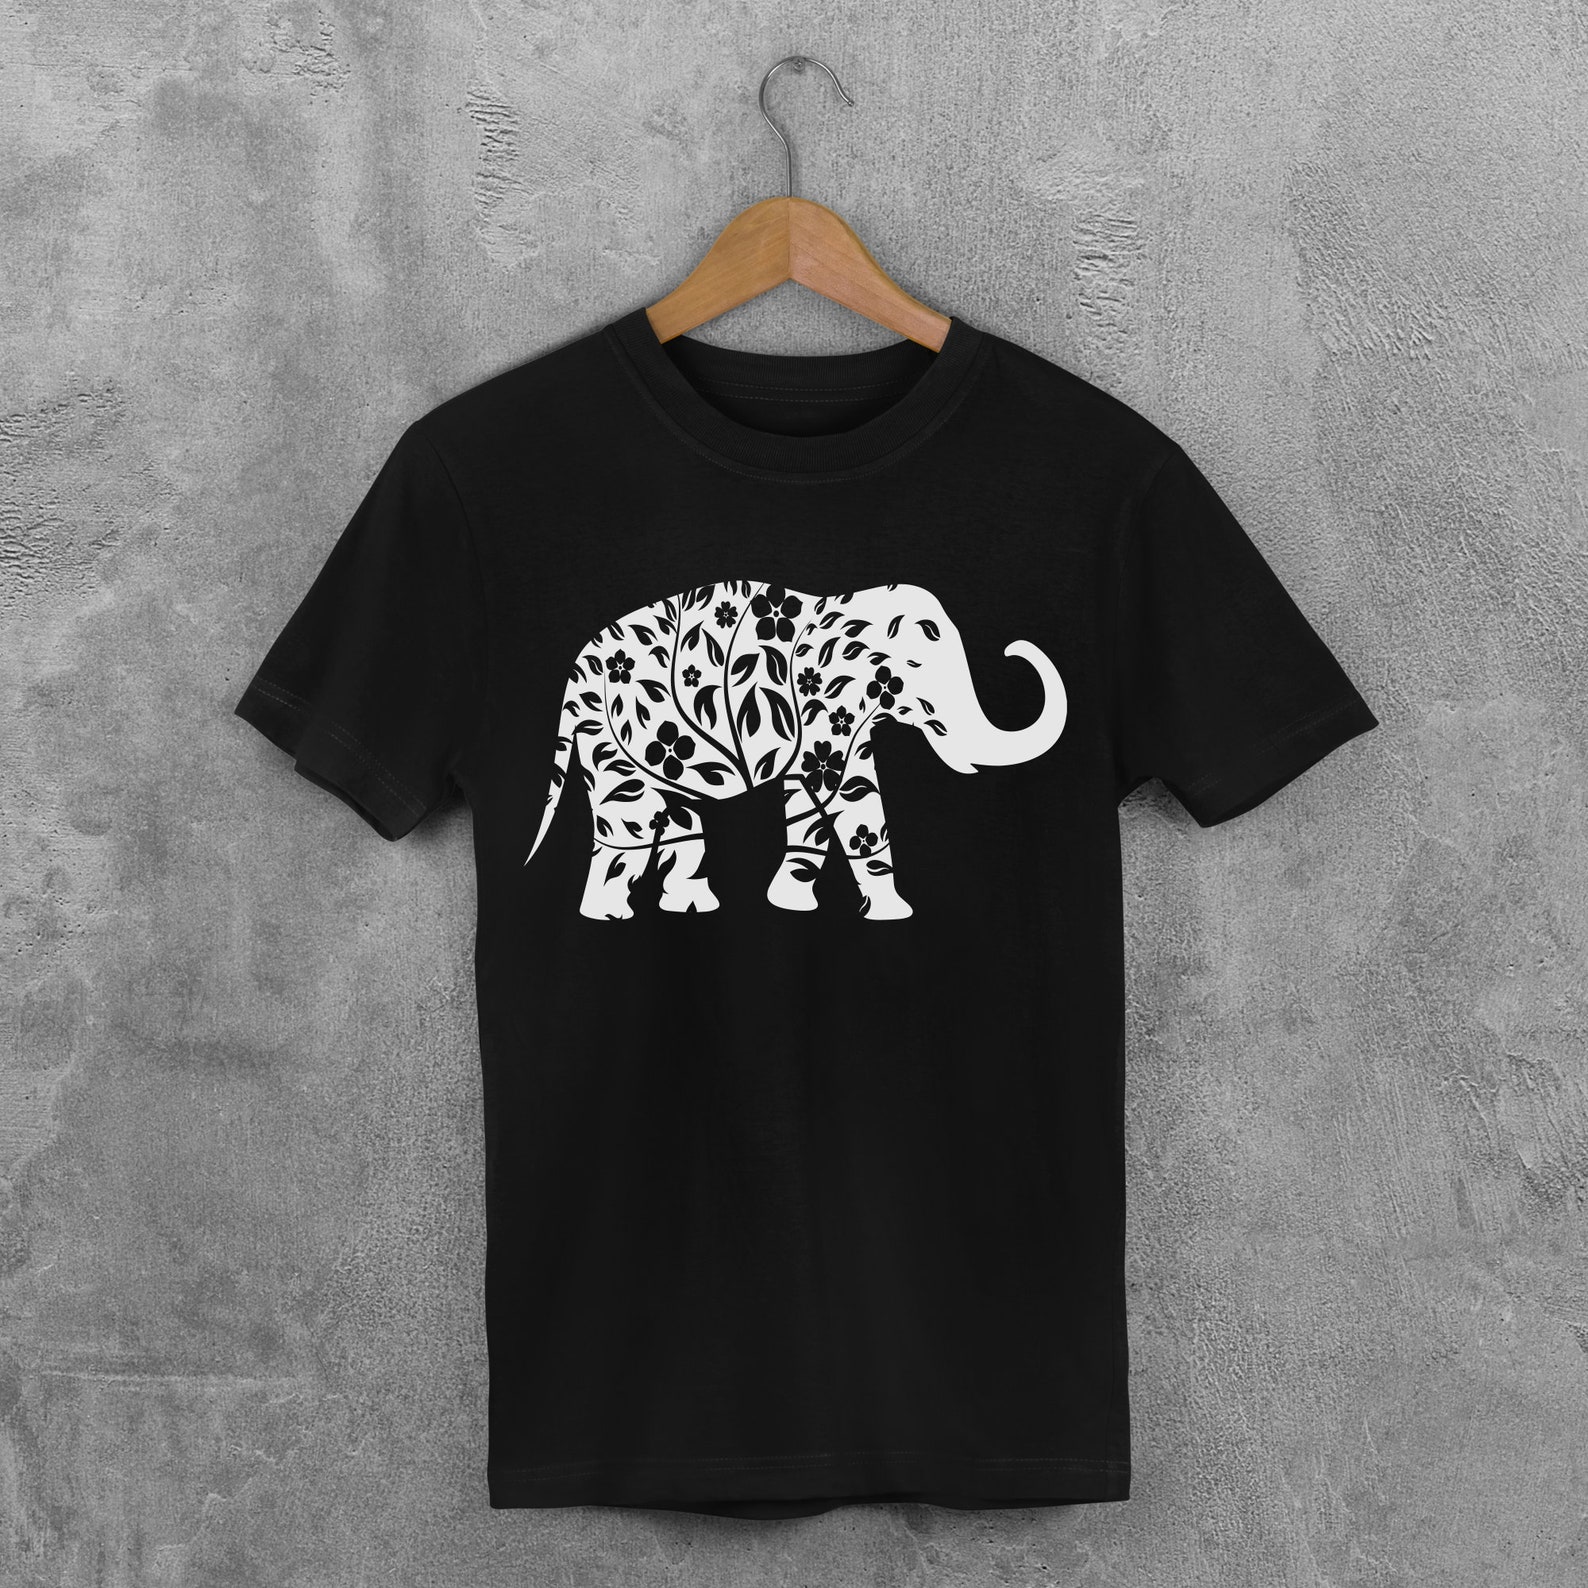 Incredible T-Shirt design with floral elephant.